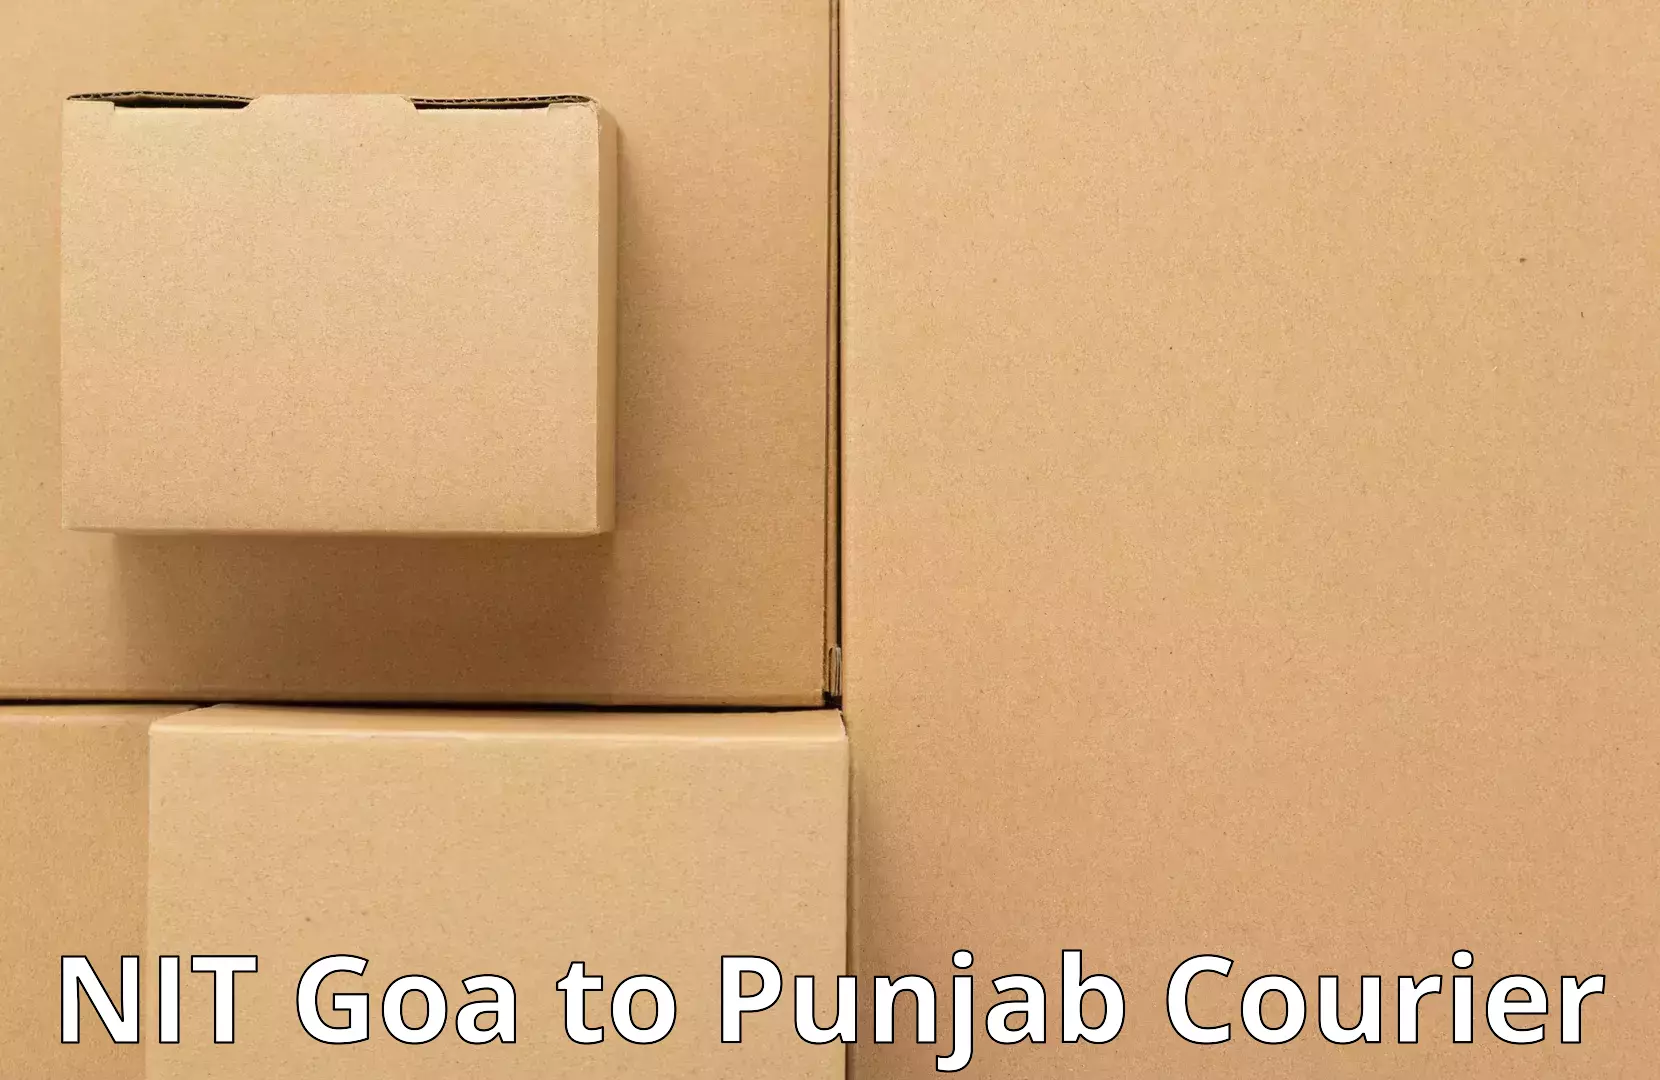 Professional movers and packers in NIT Goa to Punjab